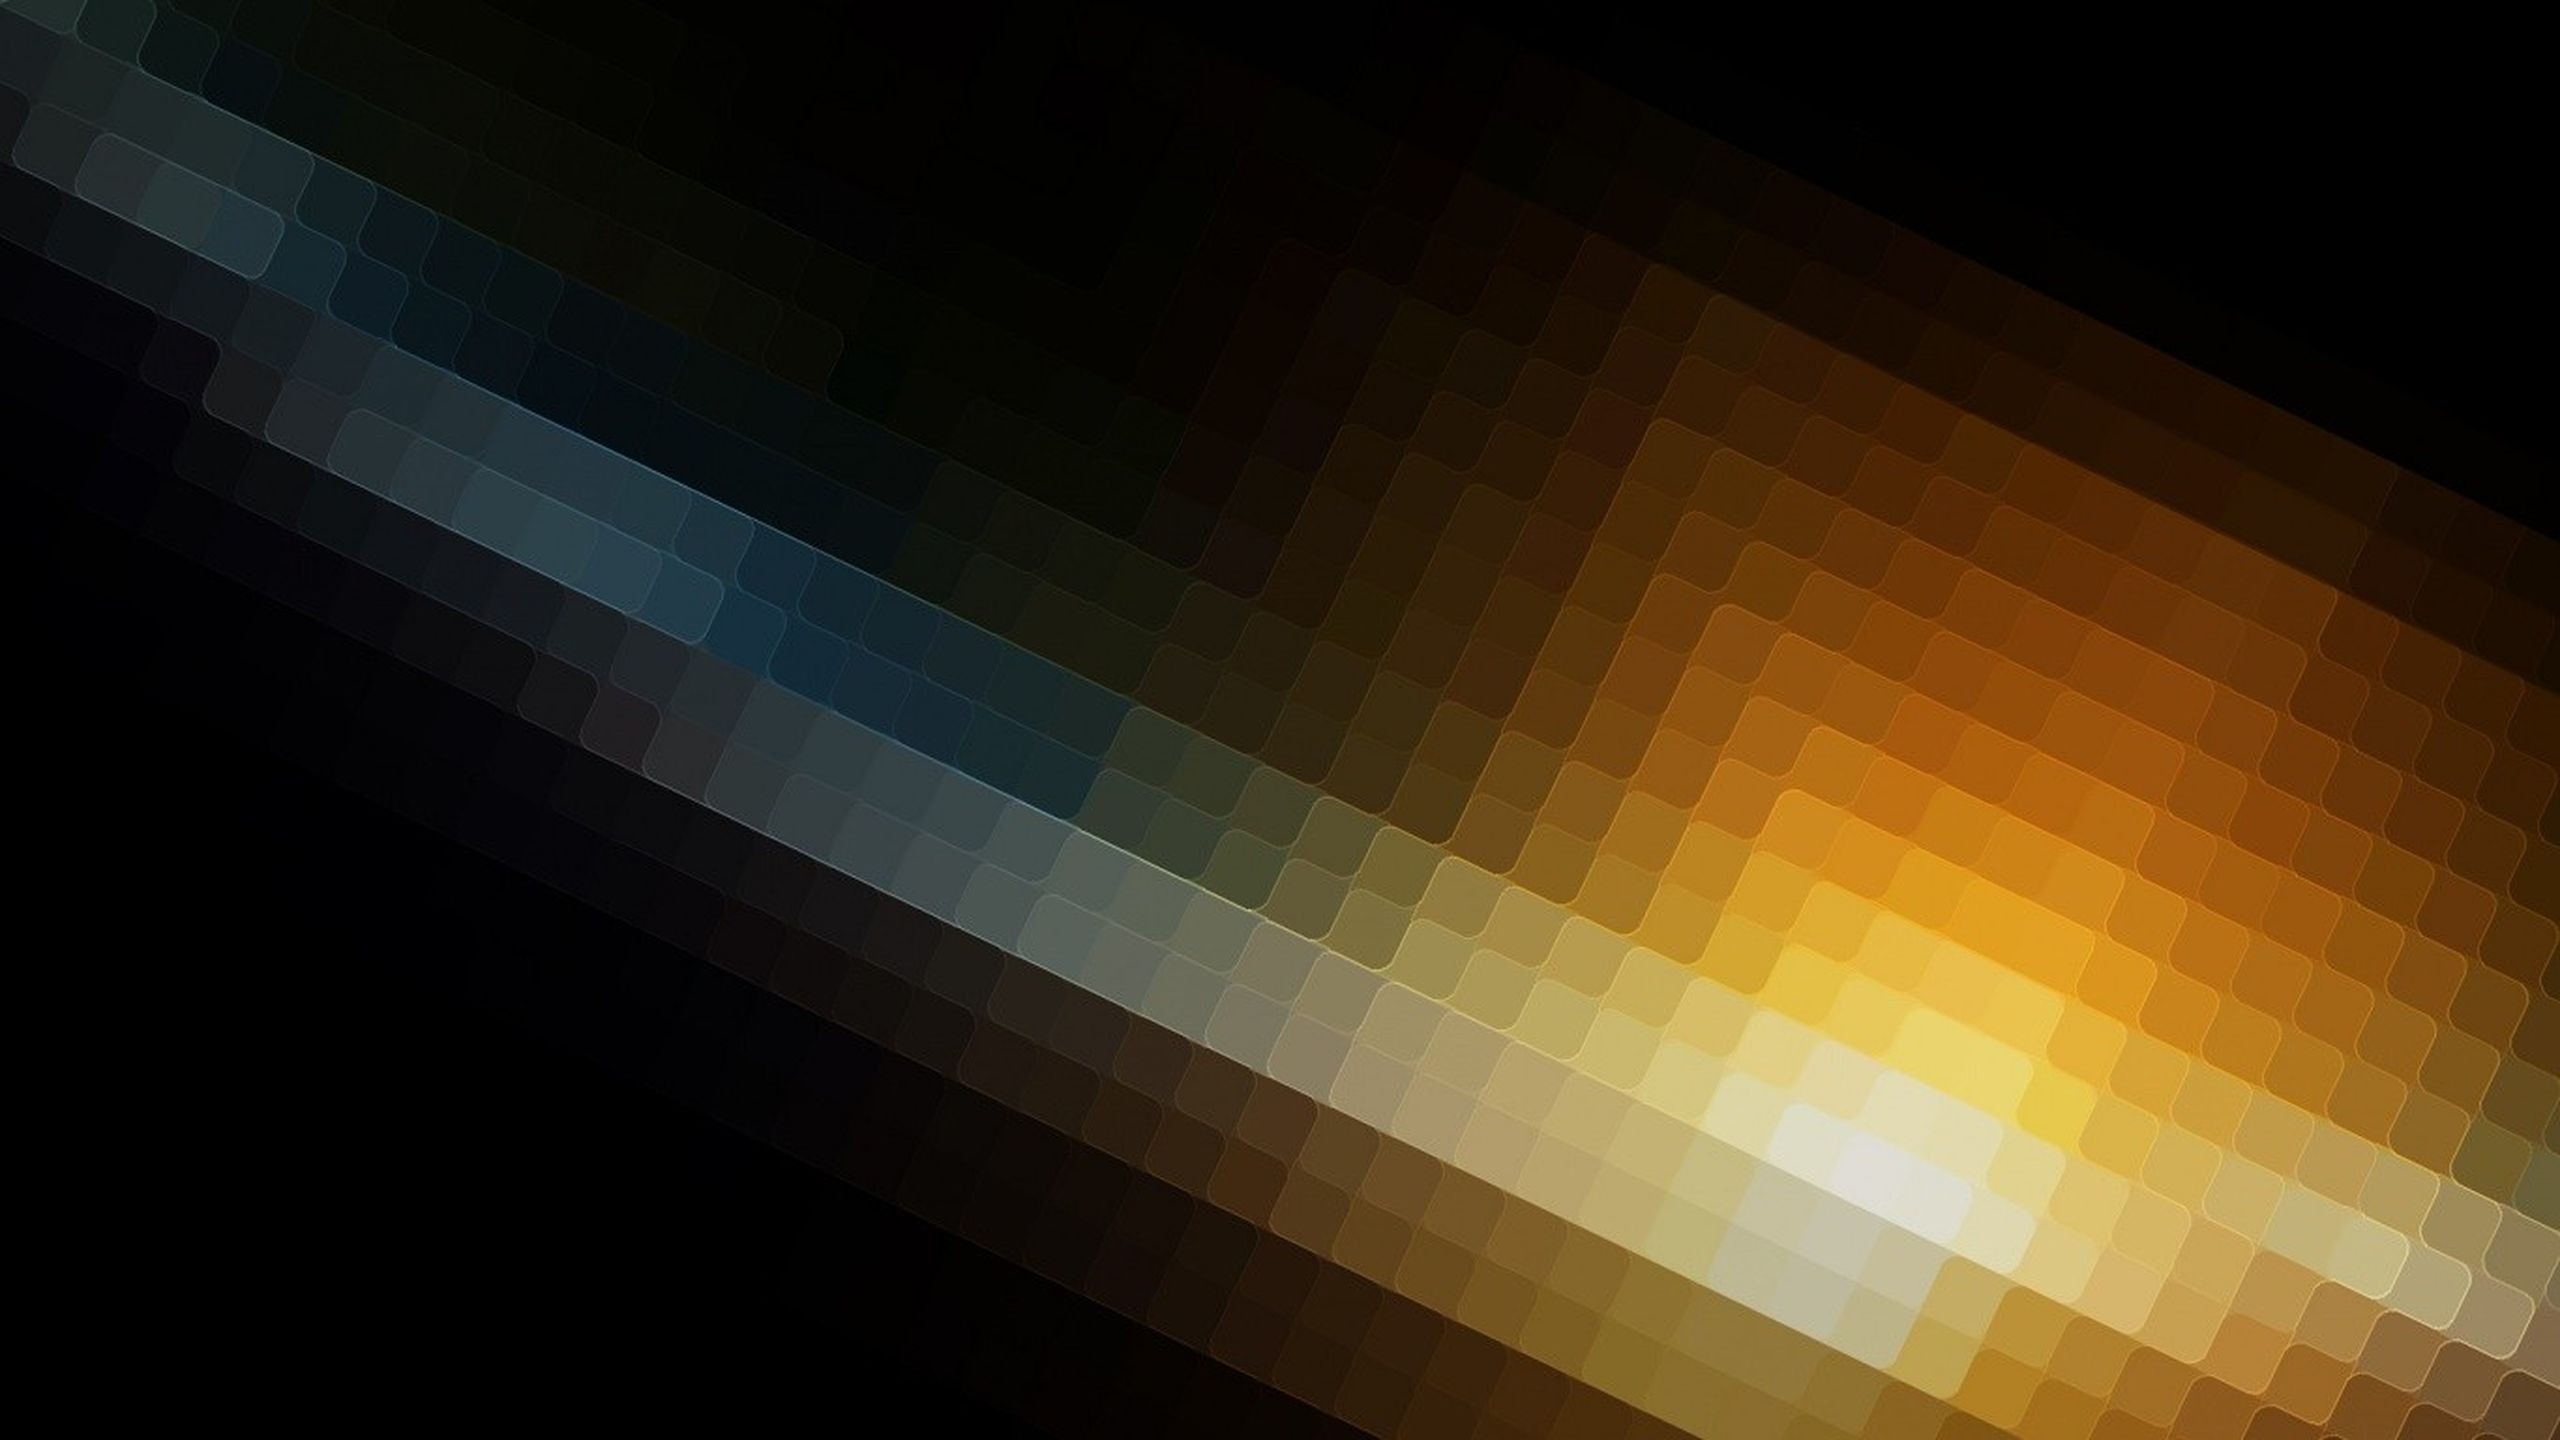 General 2560x1440 abstract square colorful digital art